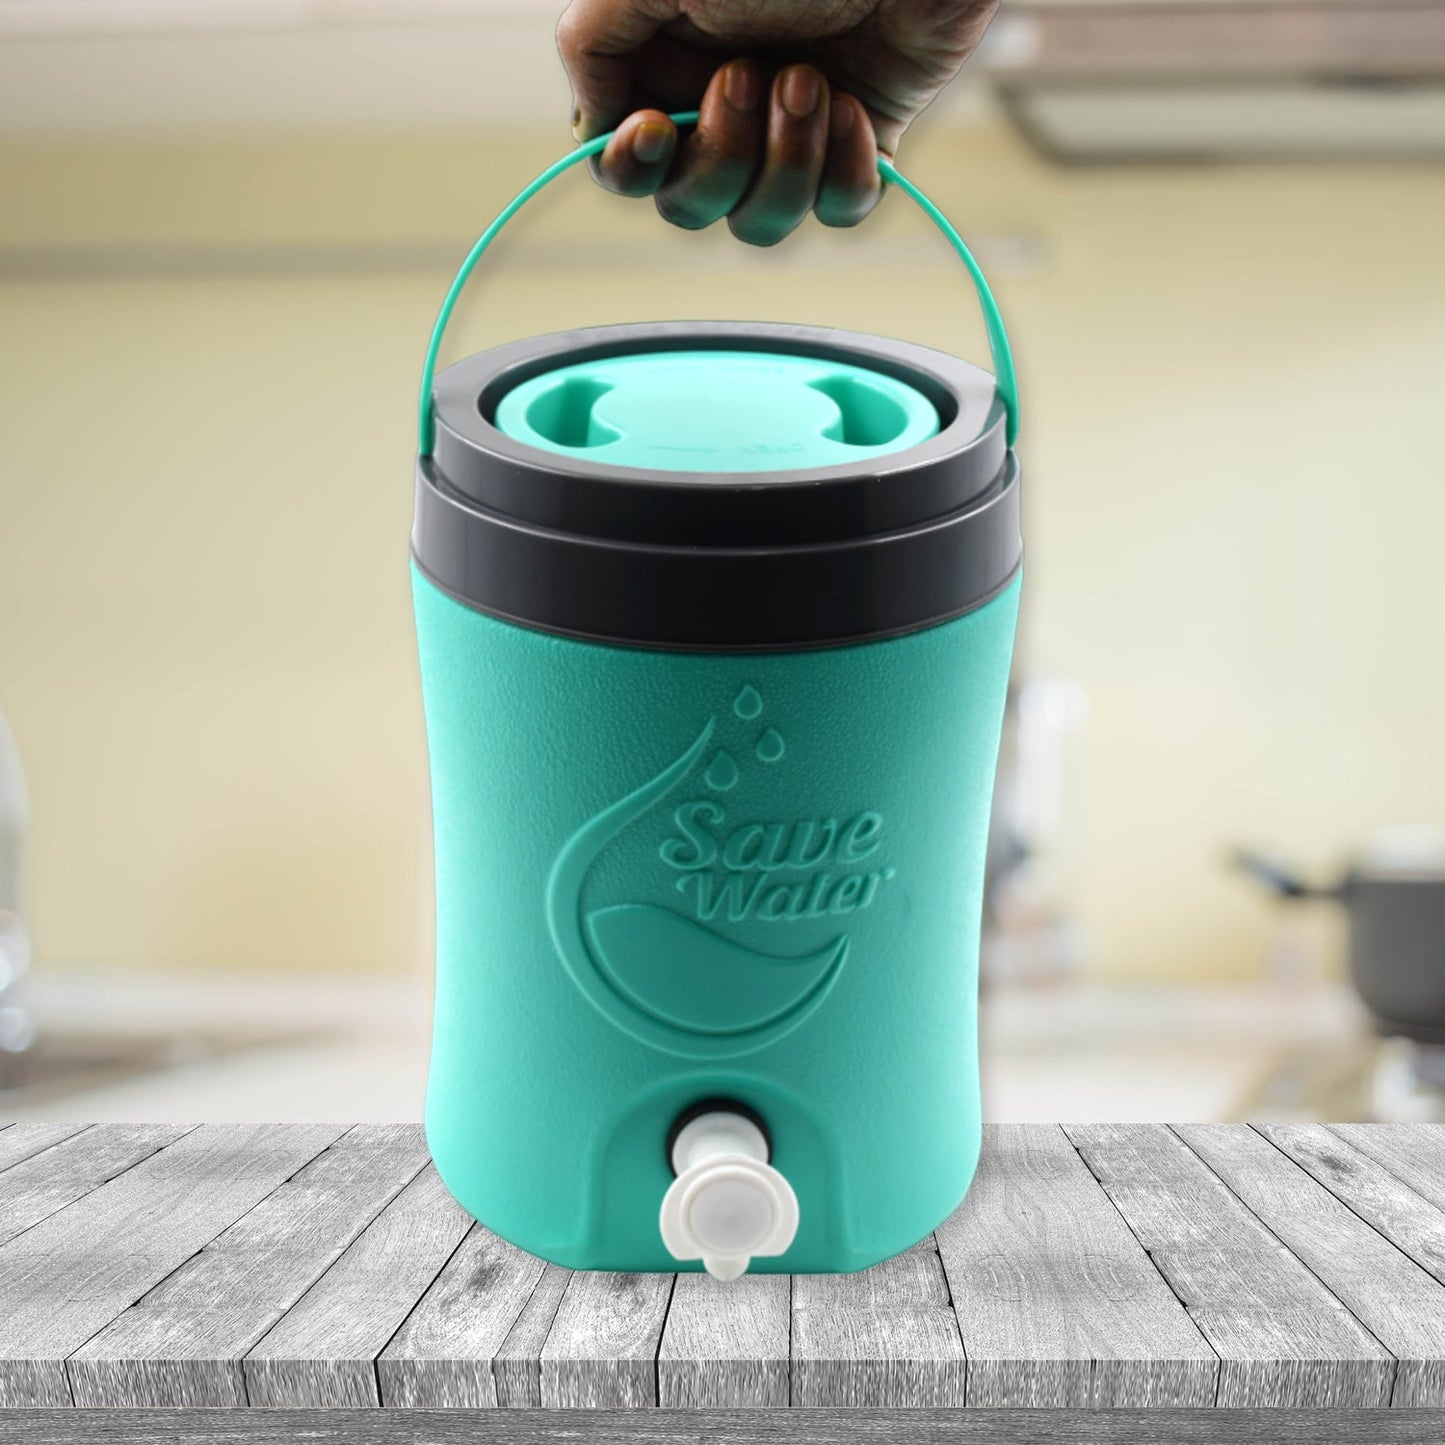 2107 Water Jug Camper with Tap Plastic Insulated Water 3.5 Liter Water Storage Cool Water Storage for Traveling Water Jug 3.5 Ltr